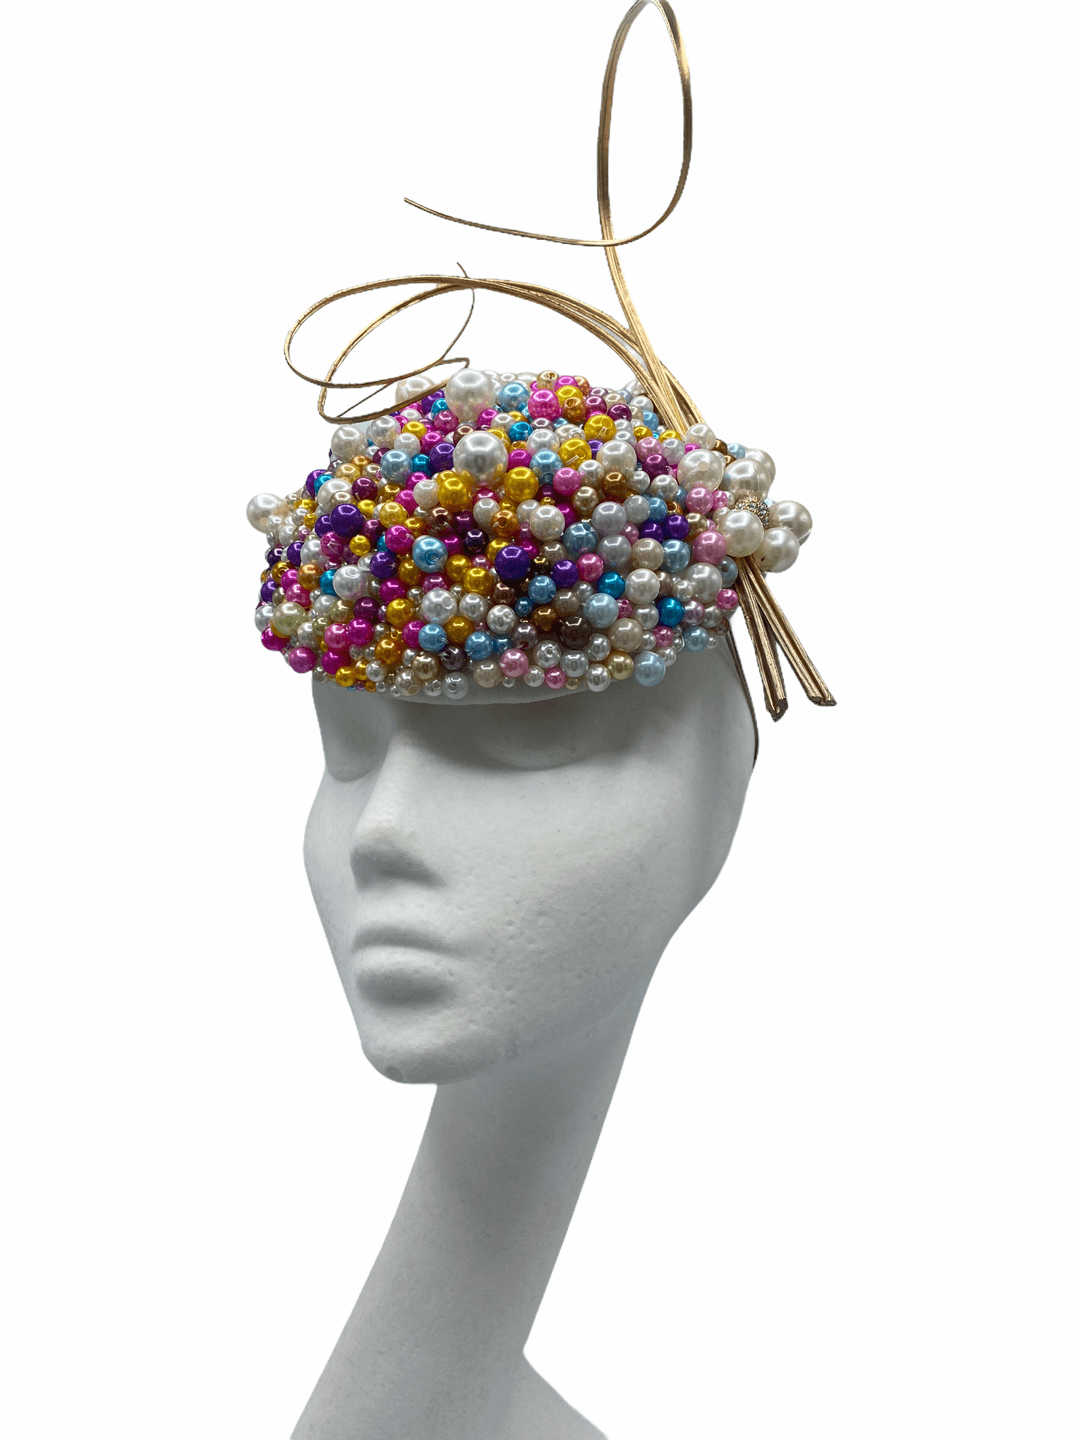 Stunning multi-coloured pearl encrusted headpiece with gold quill detail.